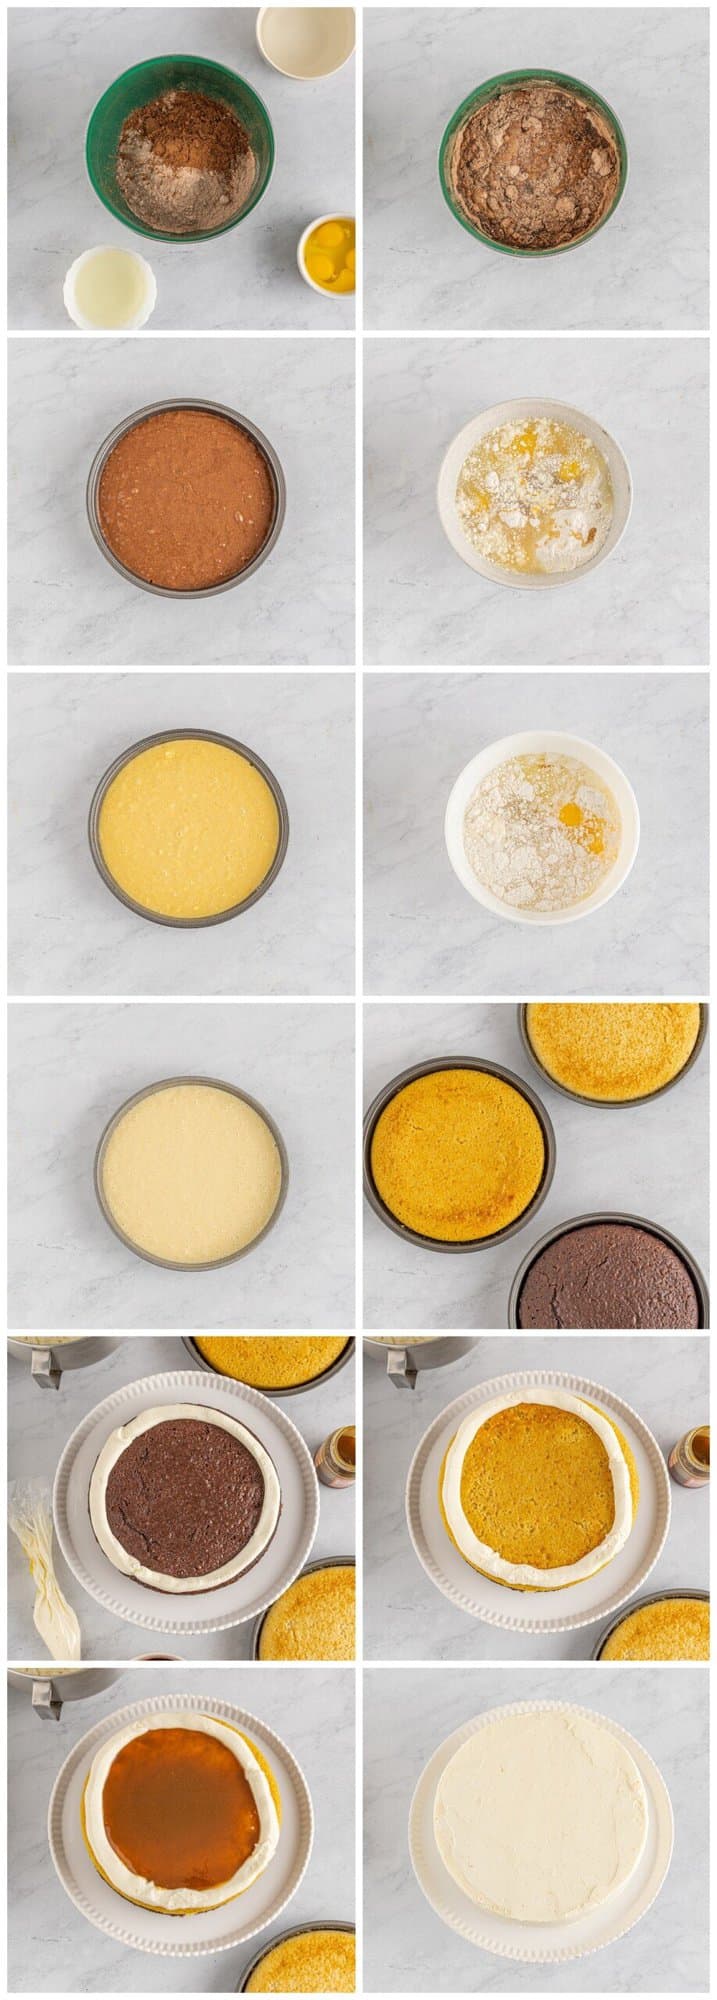 step by step photos for how to make chocolate caramel ombre cake.